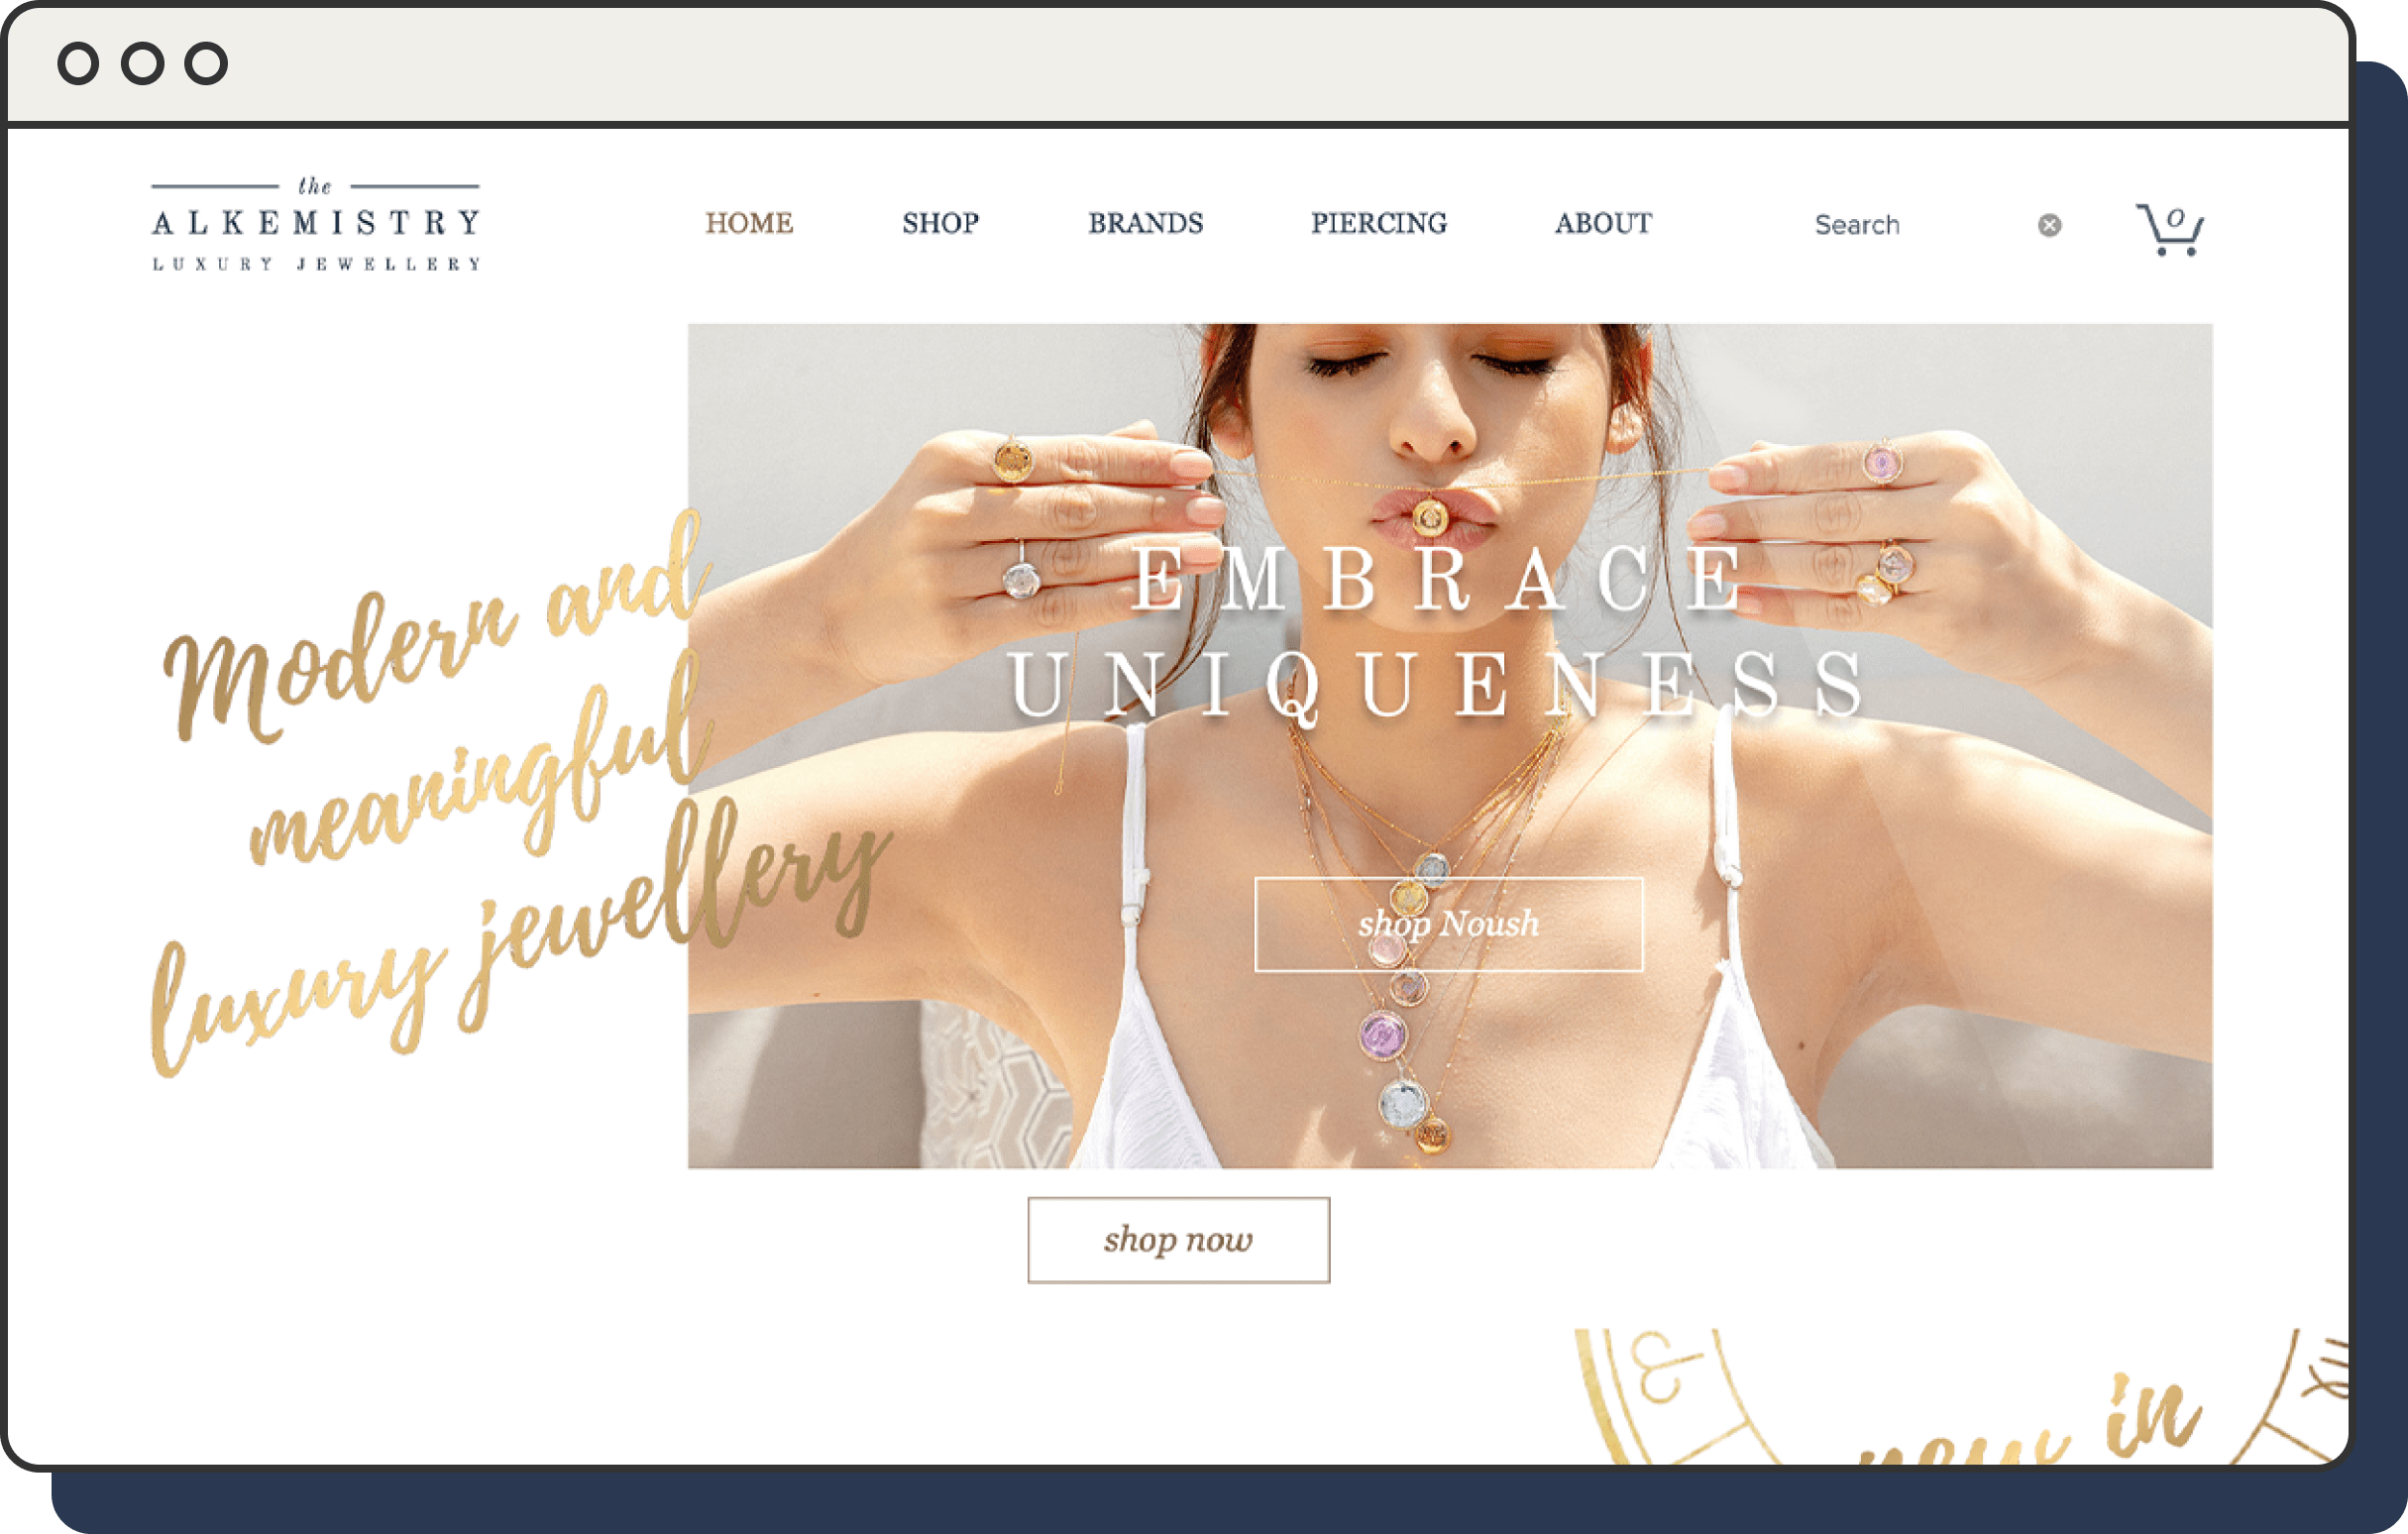 Homepage of the Alkemistry with a picture of a woman wearing golden jewels.